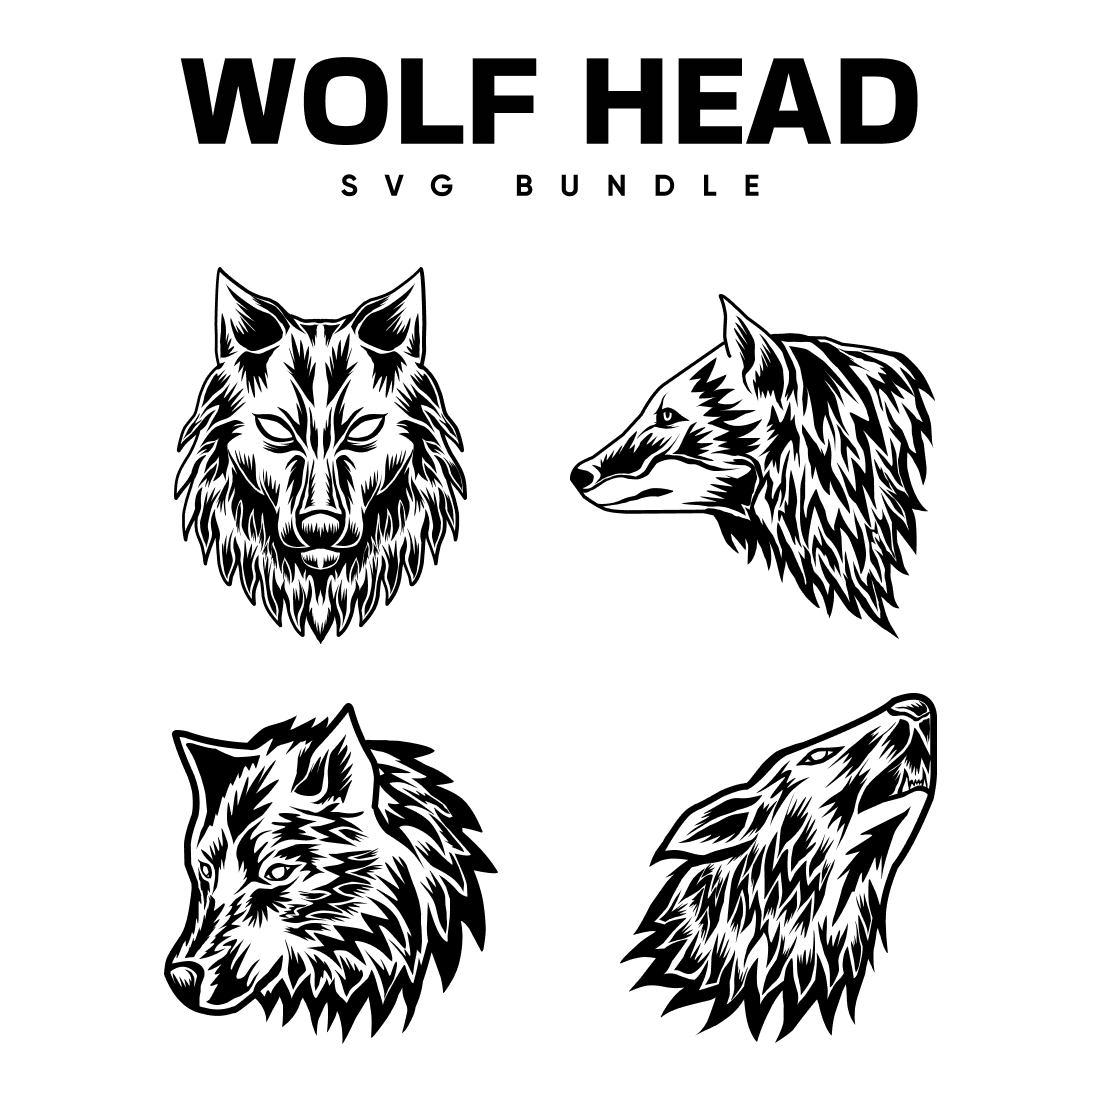 Set of four wolf heads in black and white.